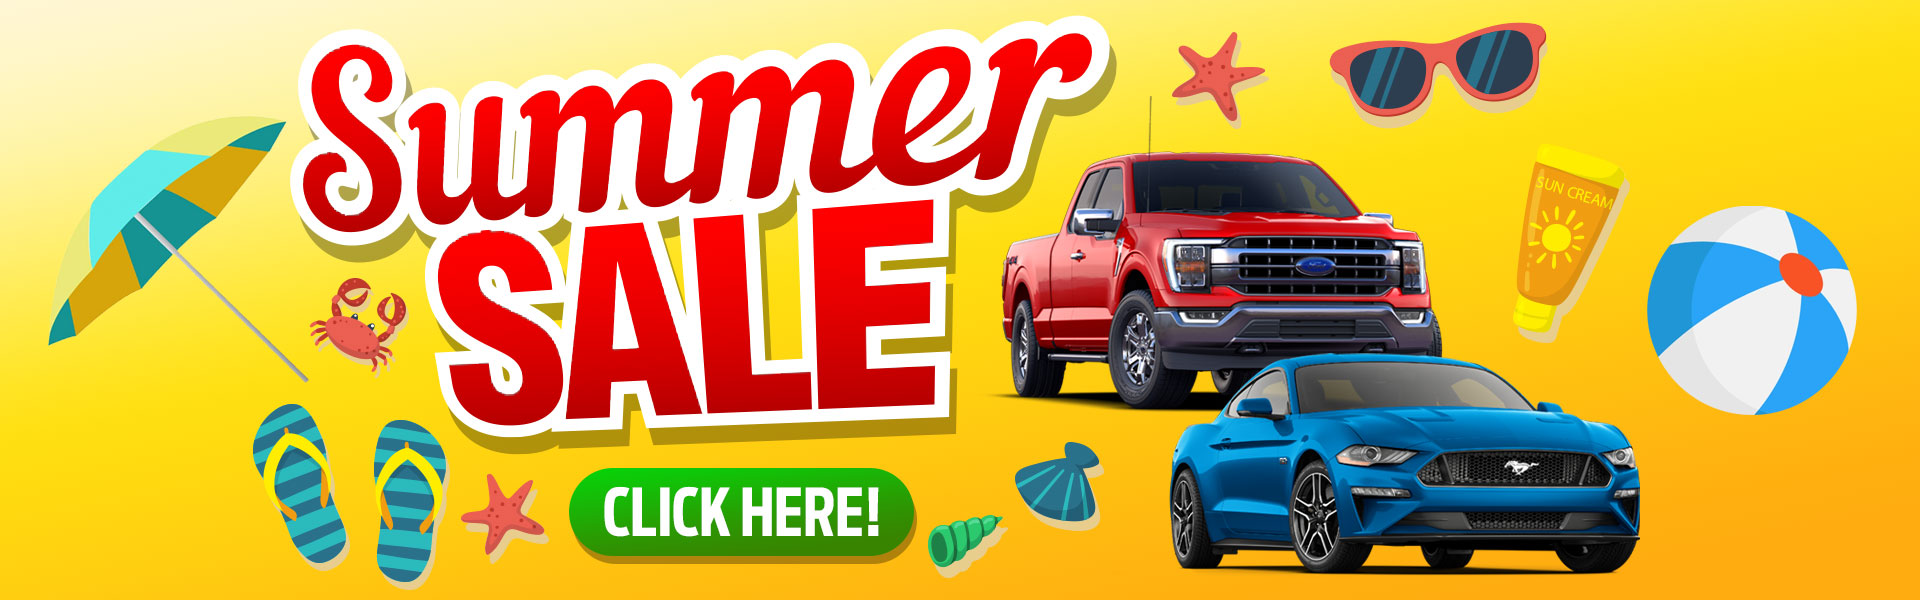 City Ford Summer Sales Event!